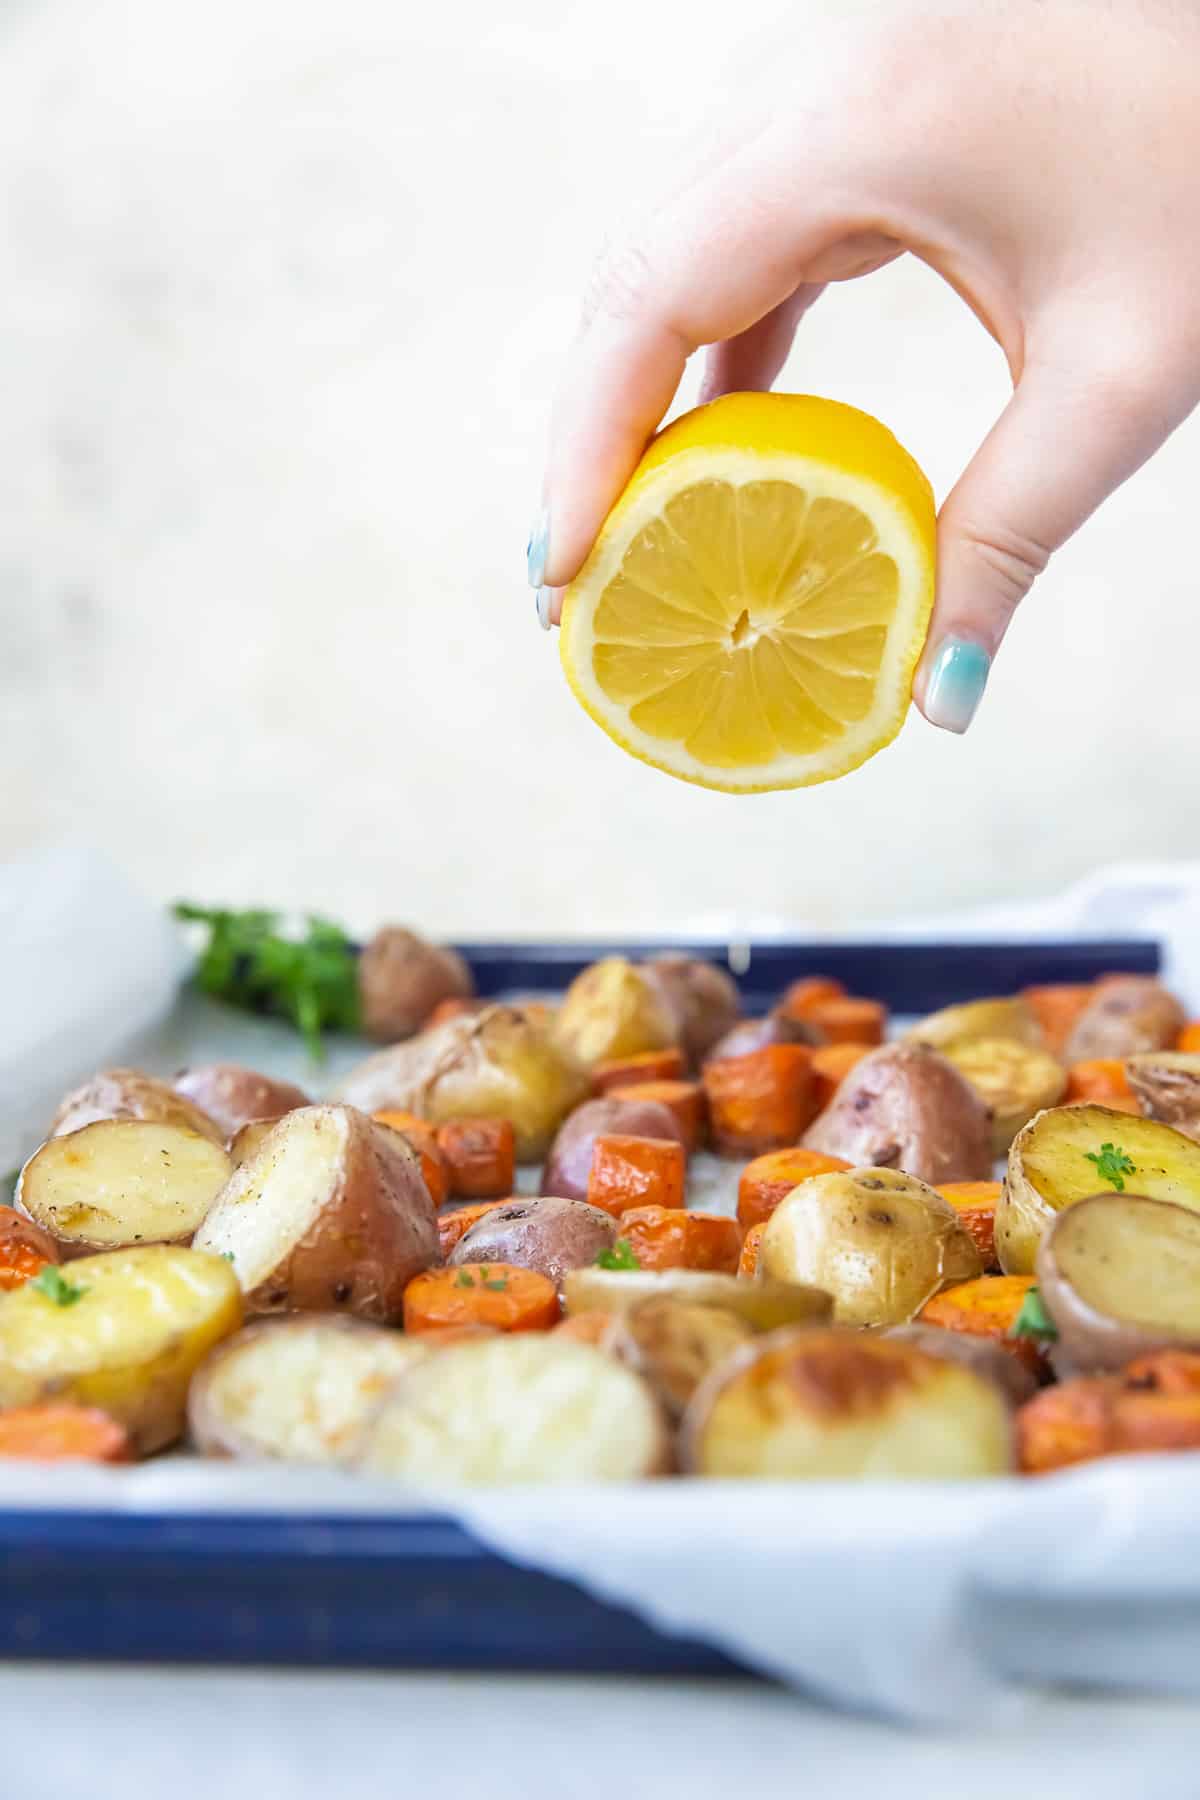 A hand squeezing juice from a lemon over a baking sheet filled with roasted carrots and potatoes.